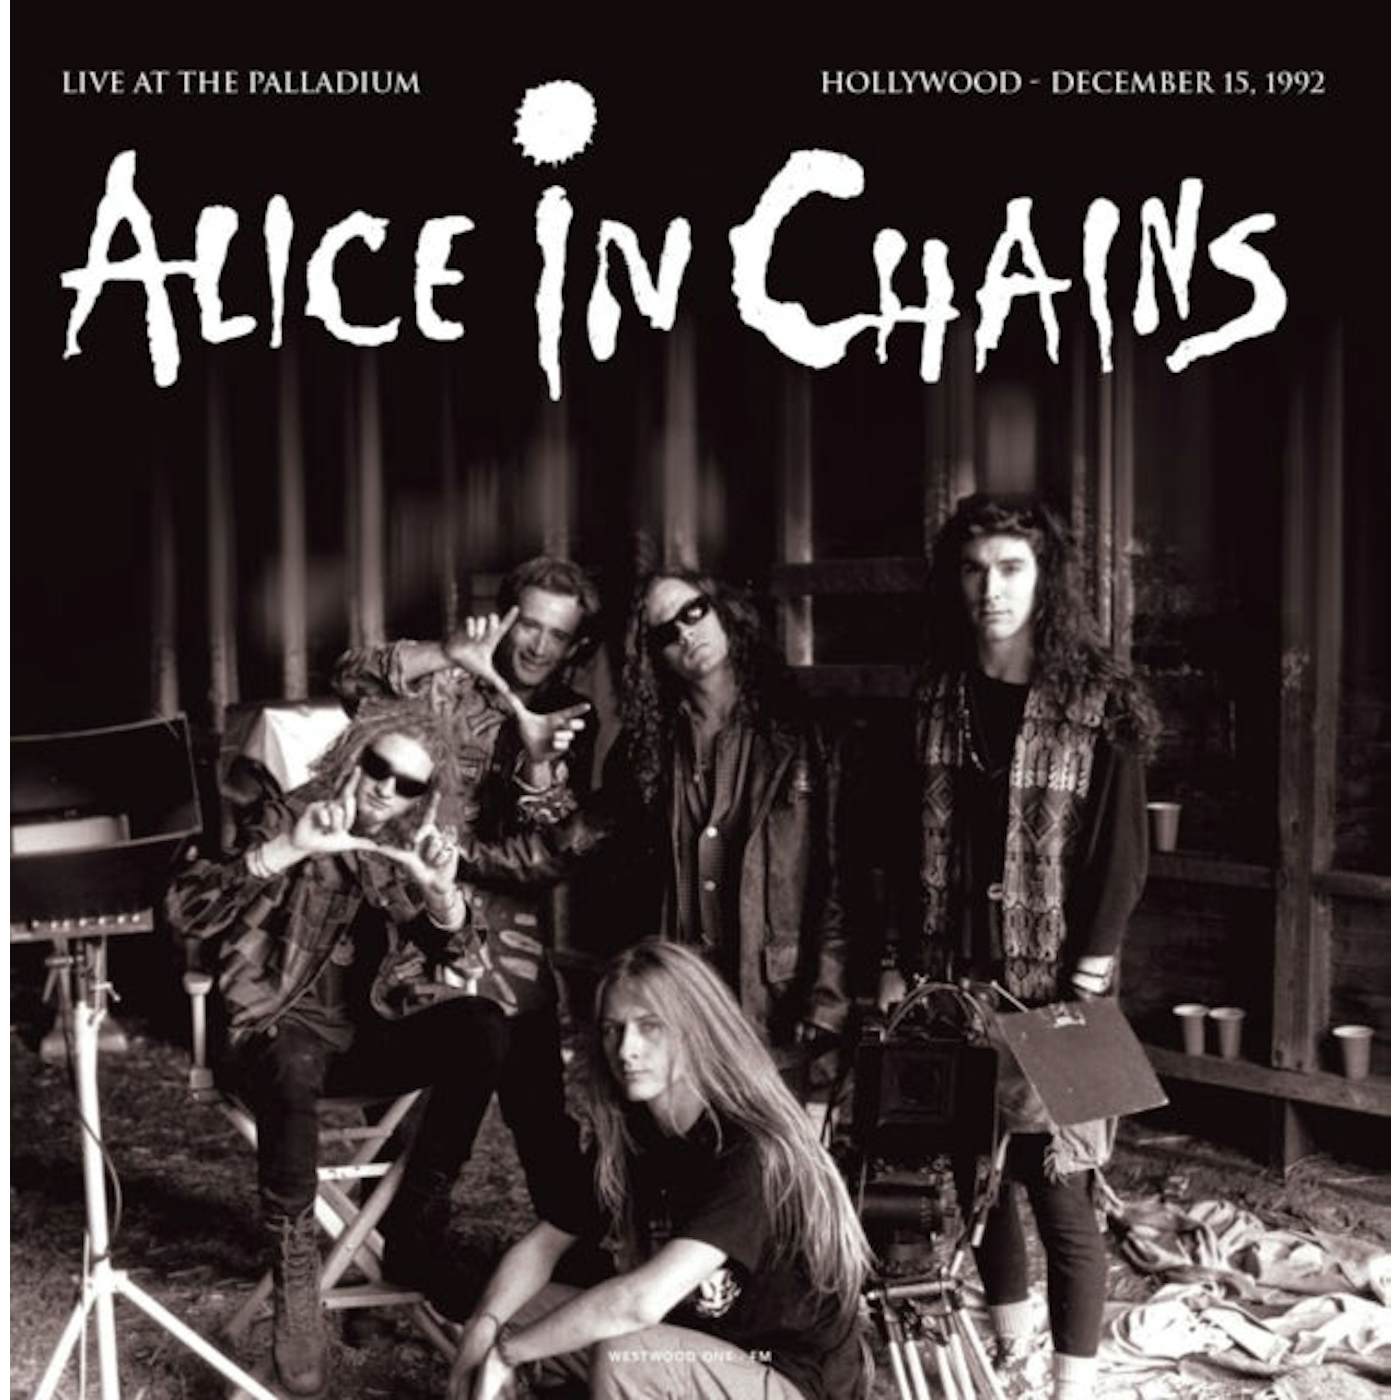 Alice In Chains LP Vinyl Record - Live At The Palladium / Hollywood (White Vinyl)